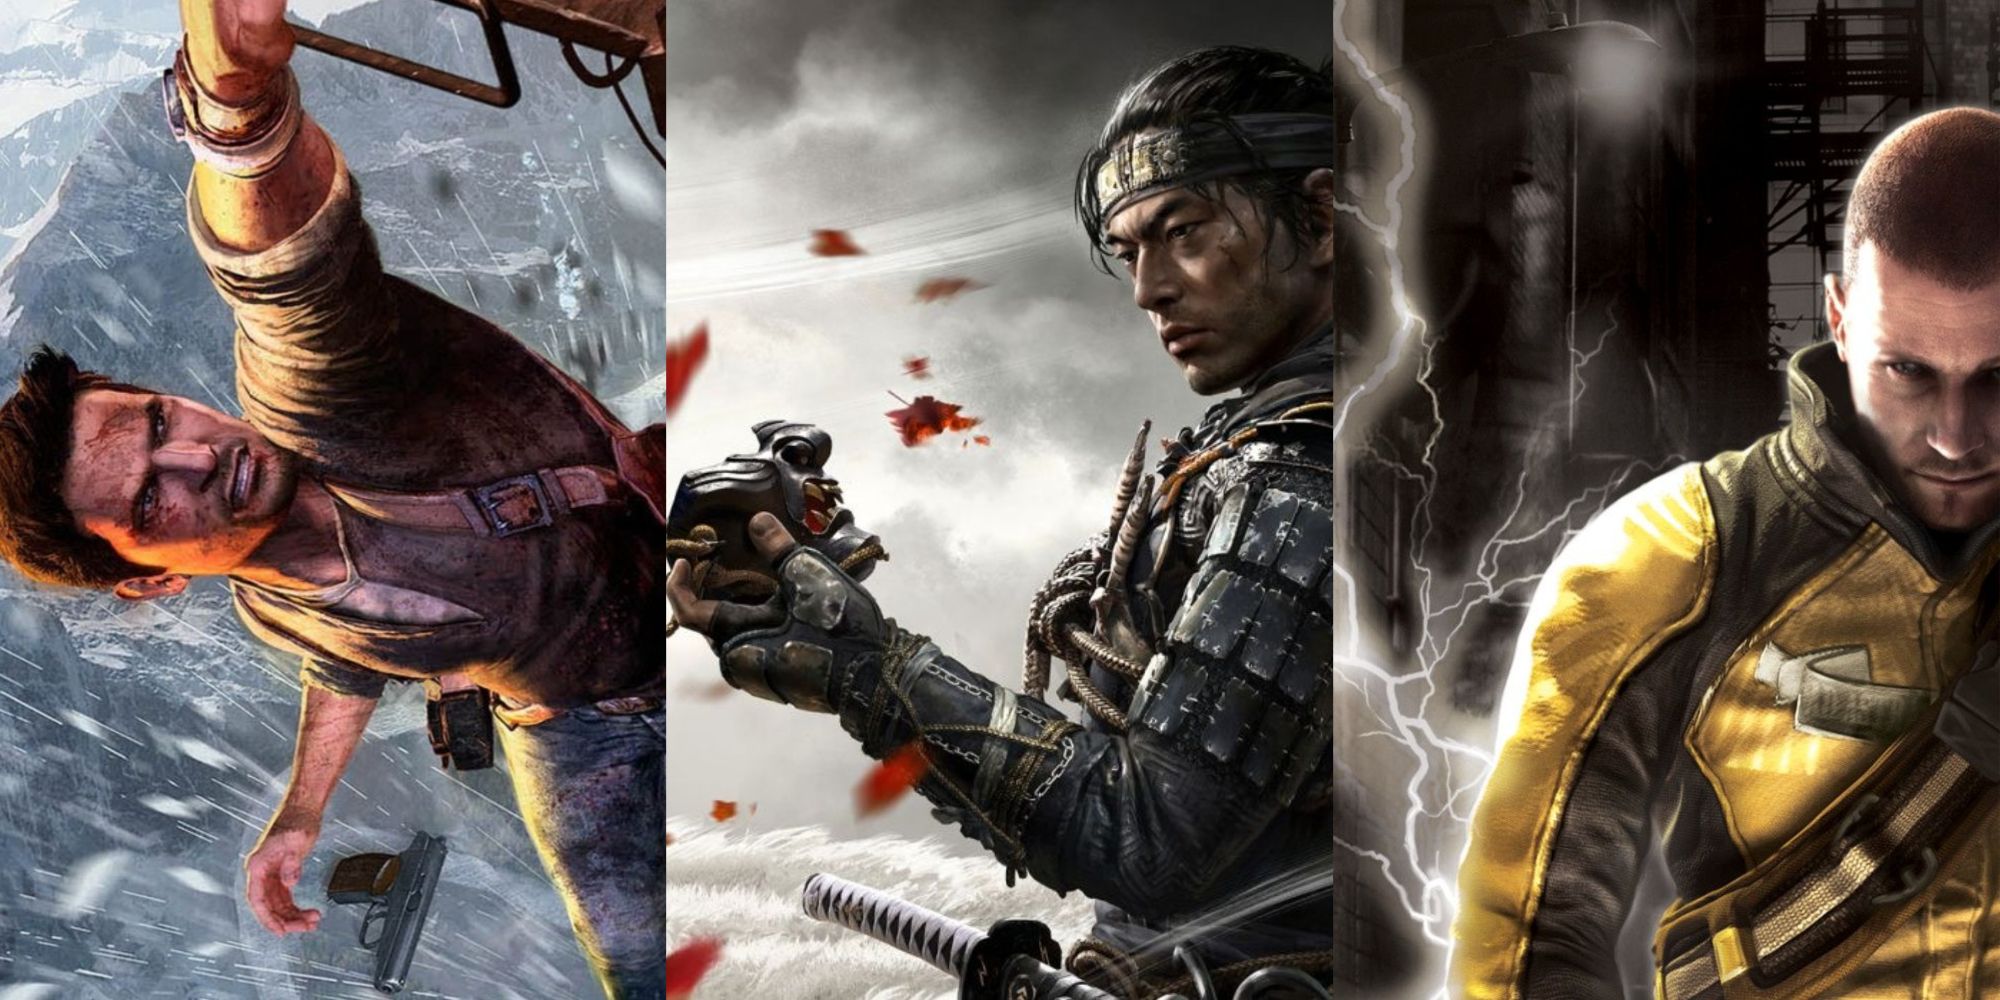 Split image of the covert art for the PlayStation games Uncharted 2: Among Thieves, Ghost of Tsushima, and Infamous.